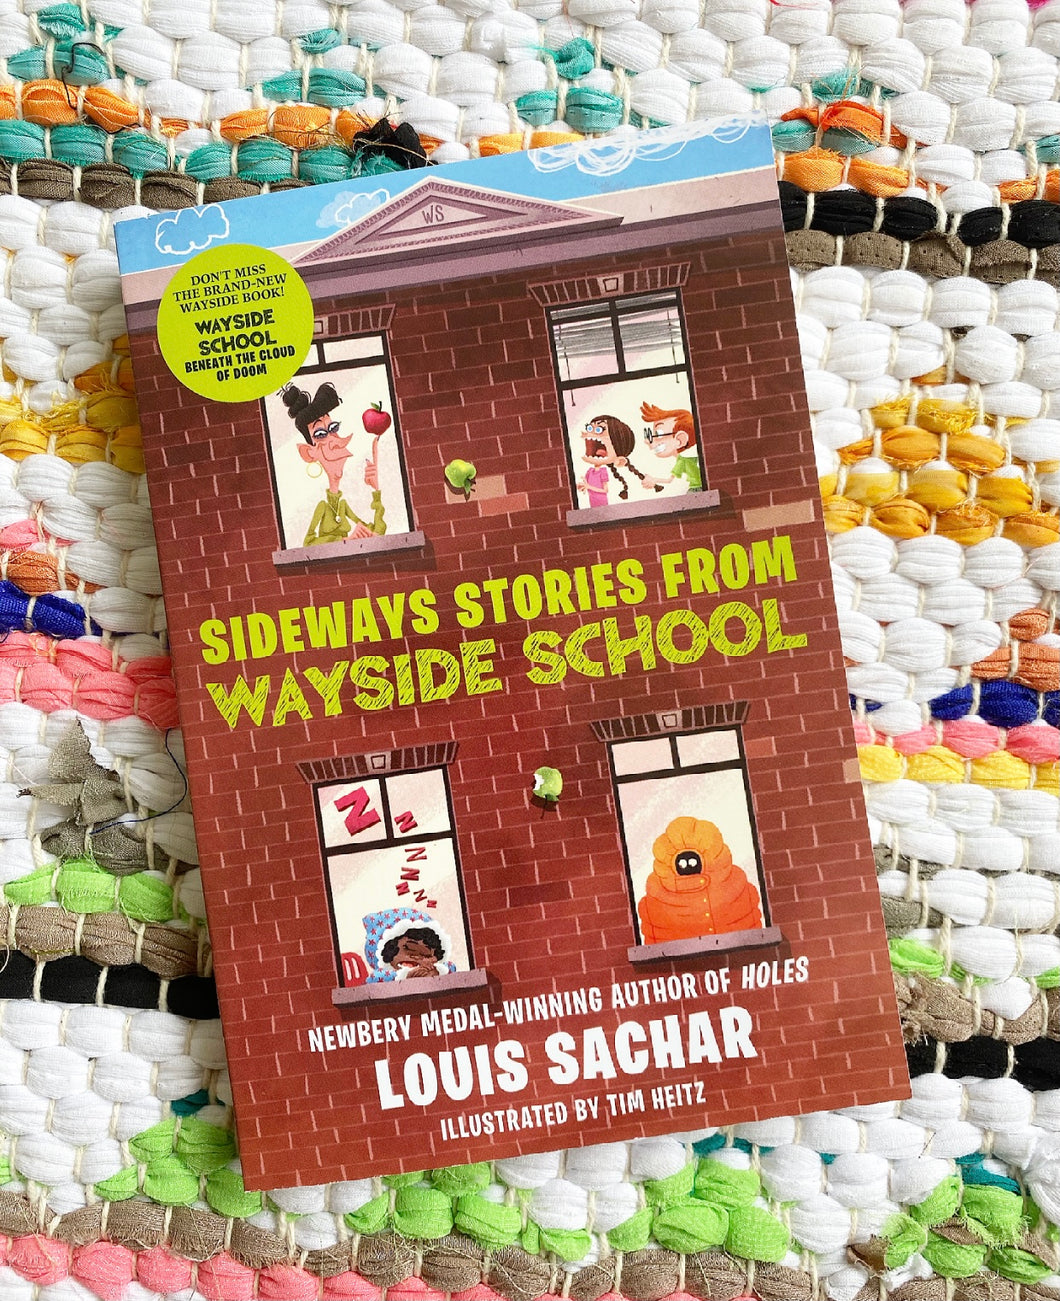 Sideways Stories from Wayside School) By Sachar, Louis (Author